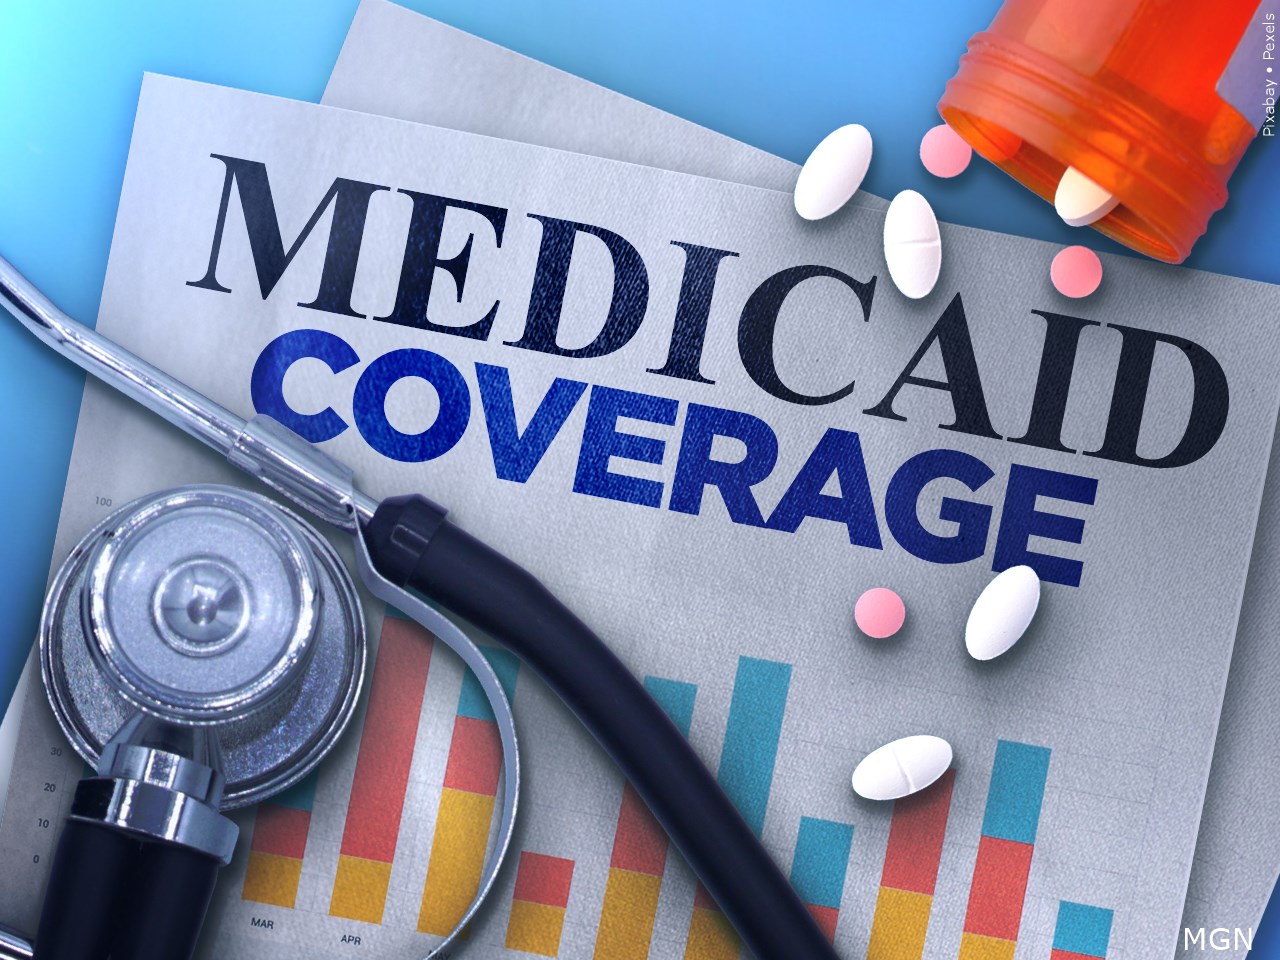 Medicaid Coverage for Women